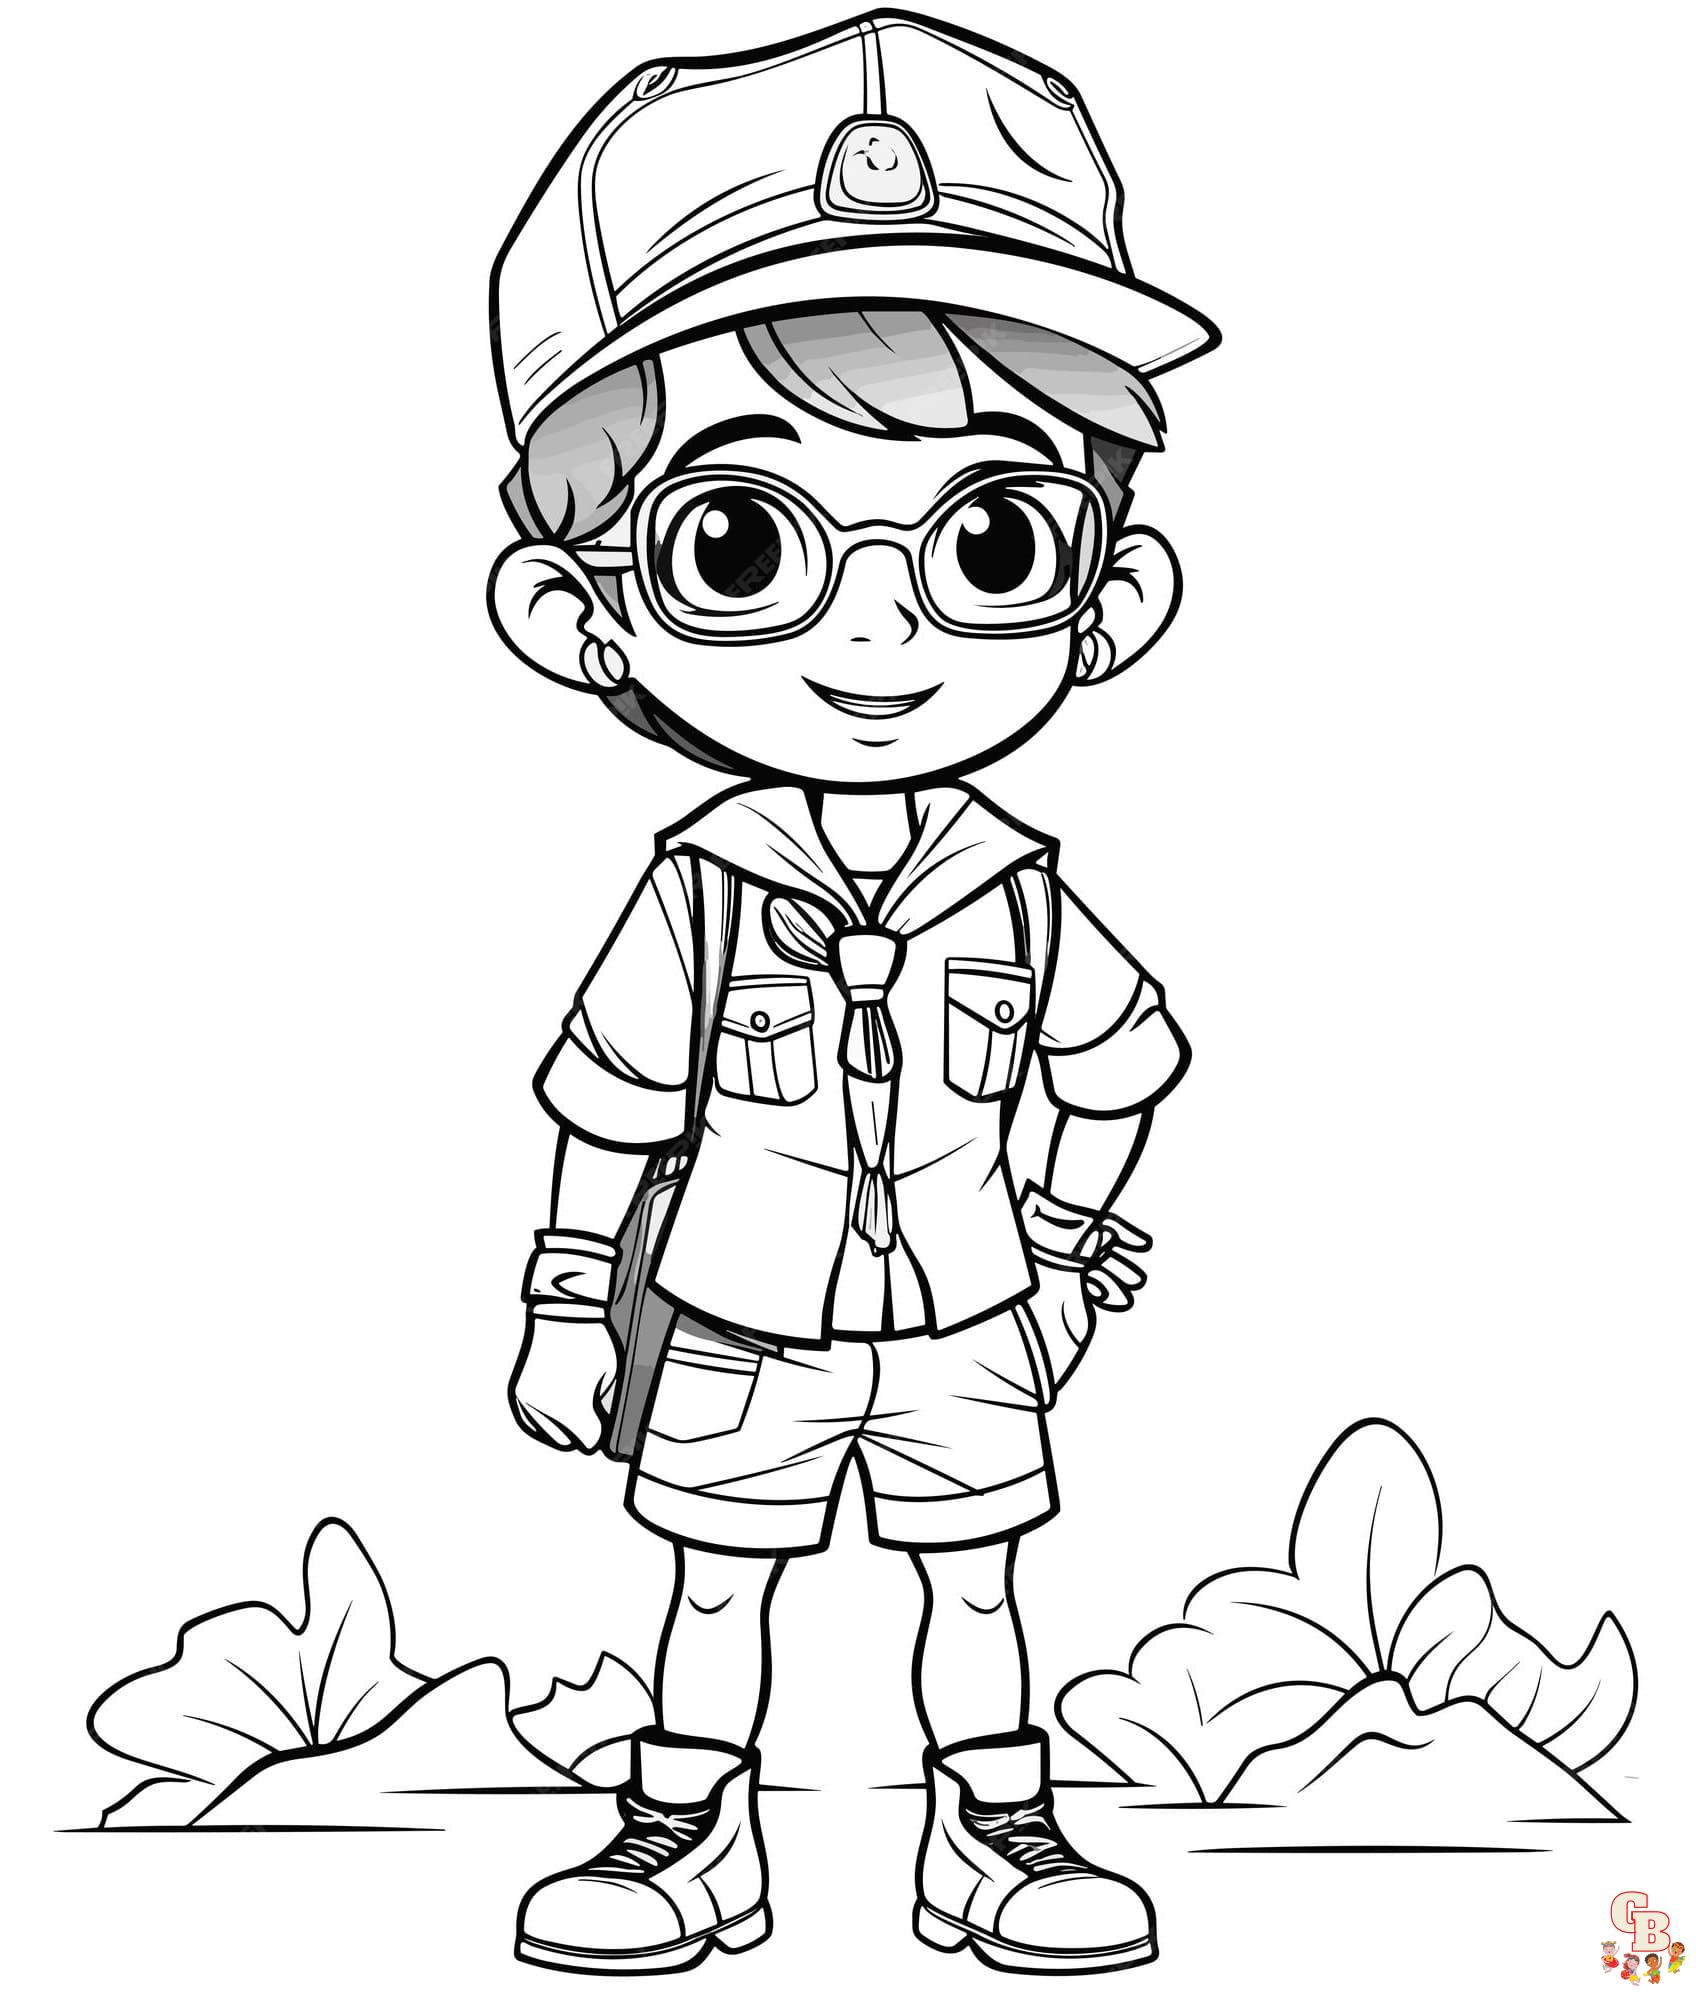 Printable Cub Scout coloring sheets